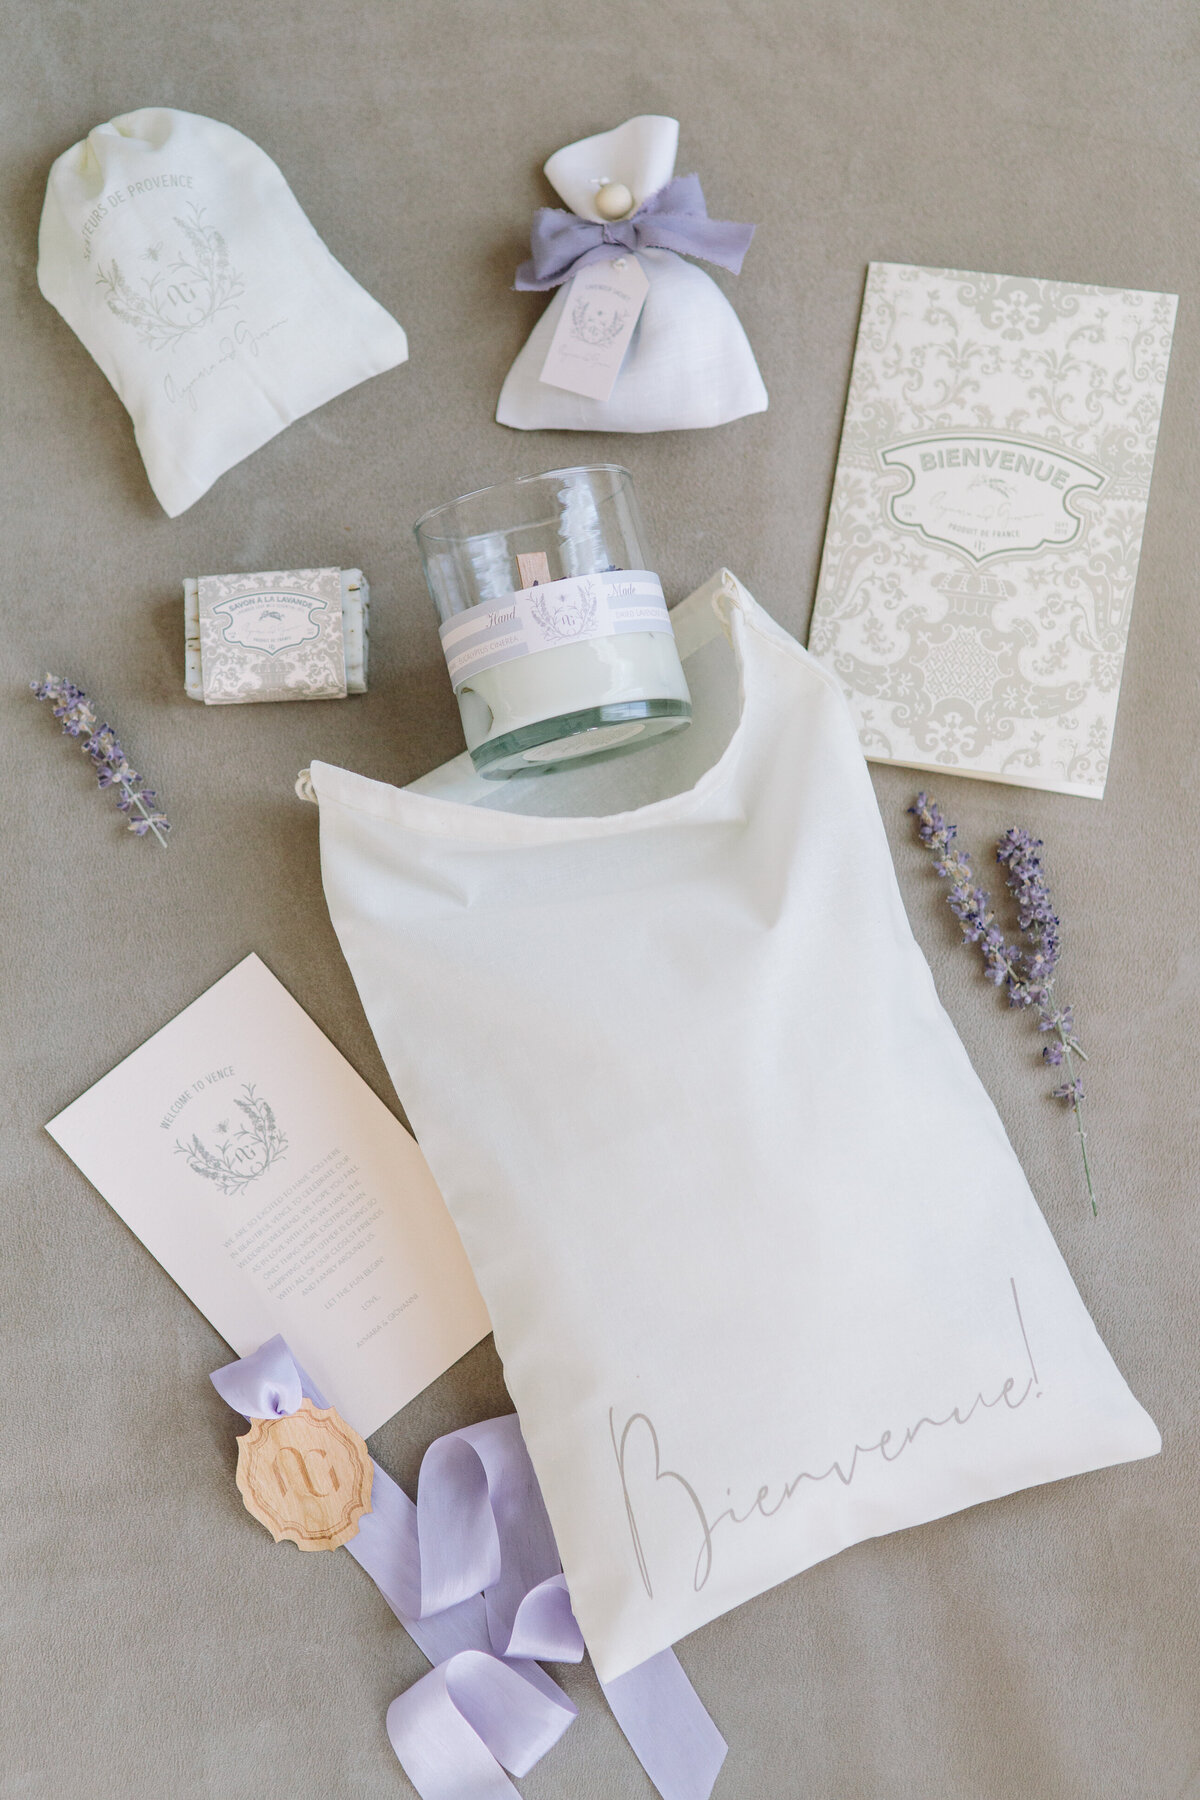 Lavender-based welcome gifts